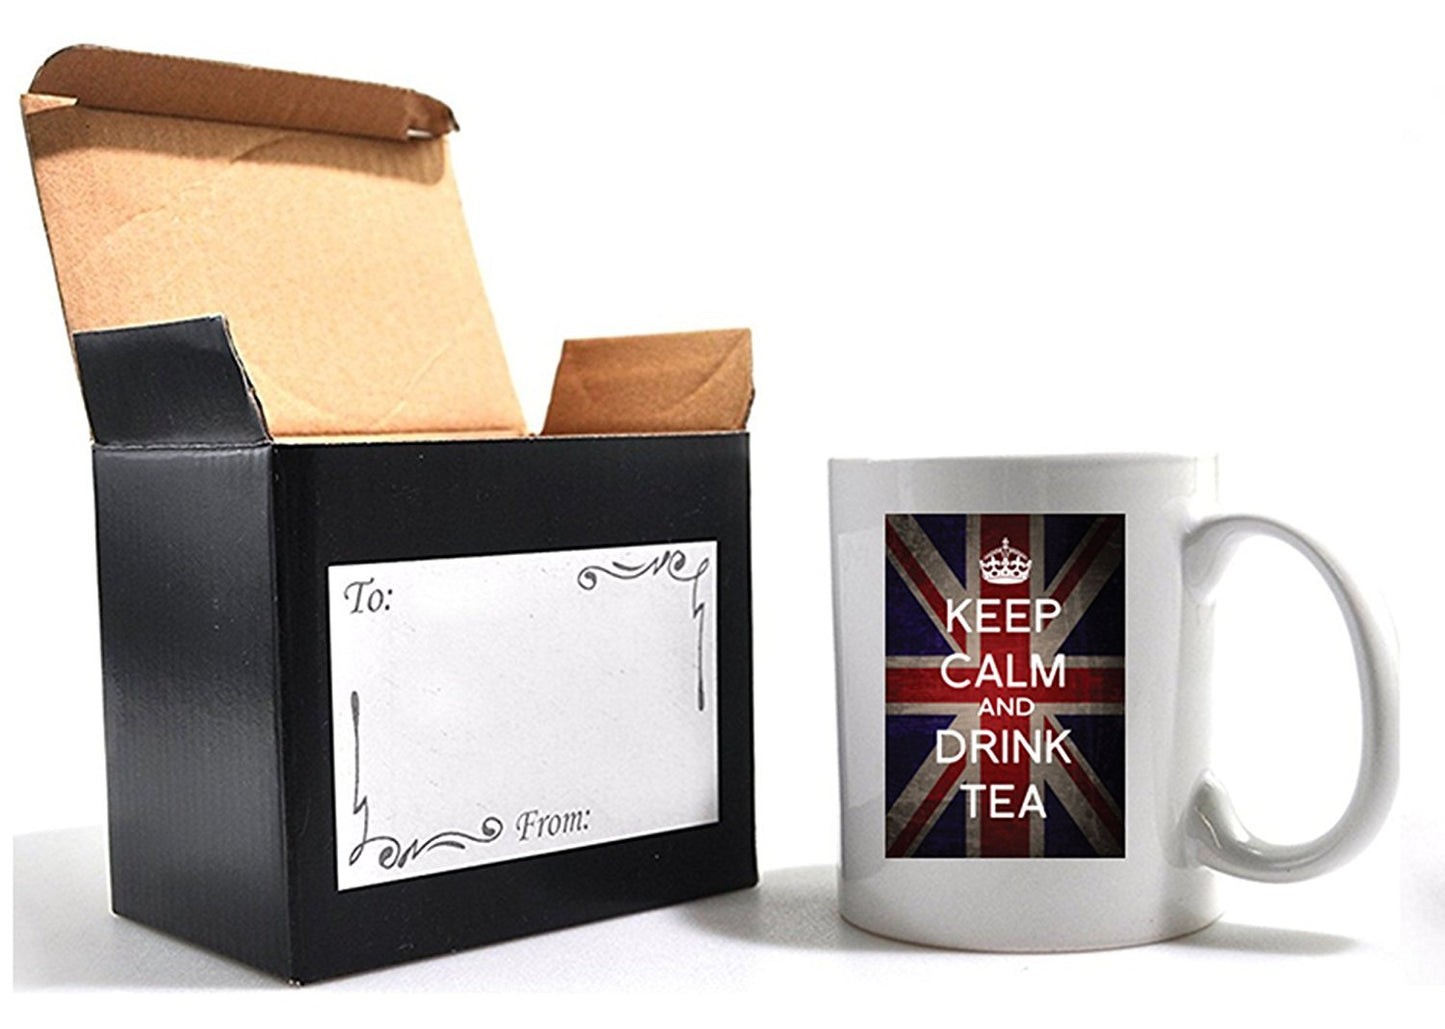 Keep Calm and drink tea mug with gift box - Army 1157 kit Army 1157 Kit Veterans Owned Business